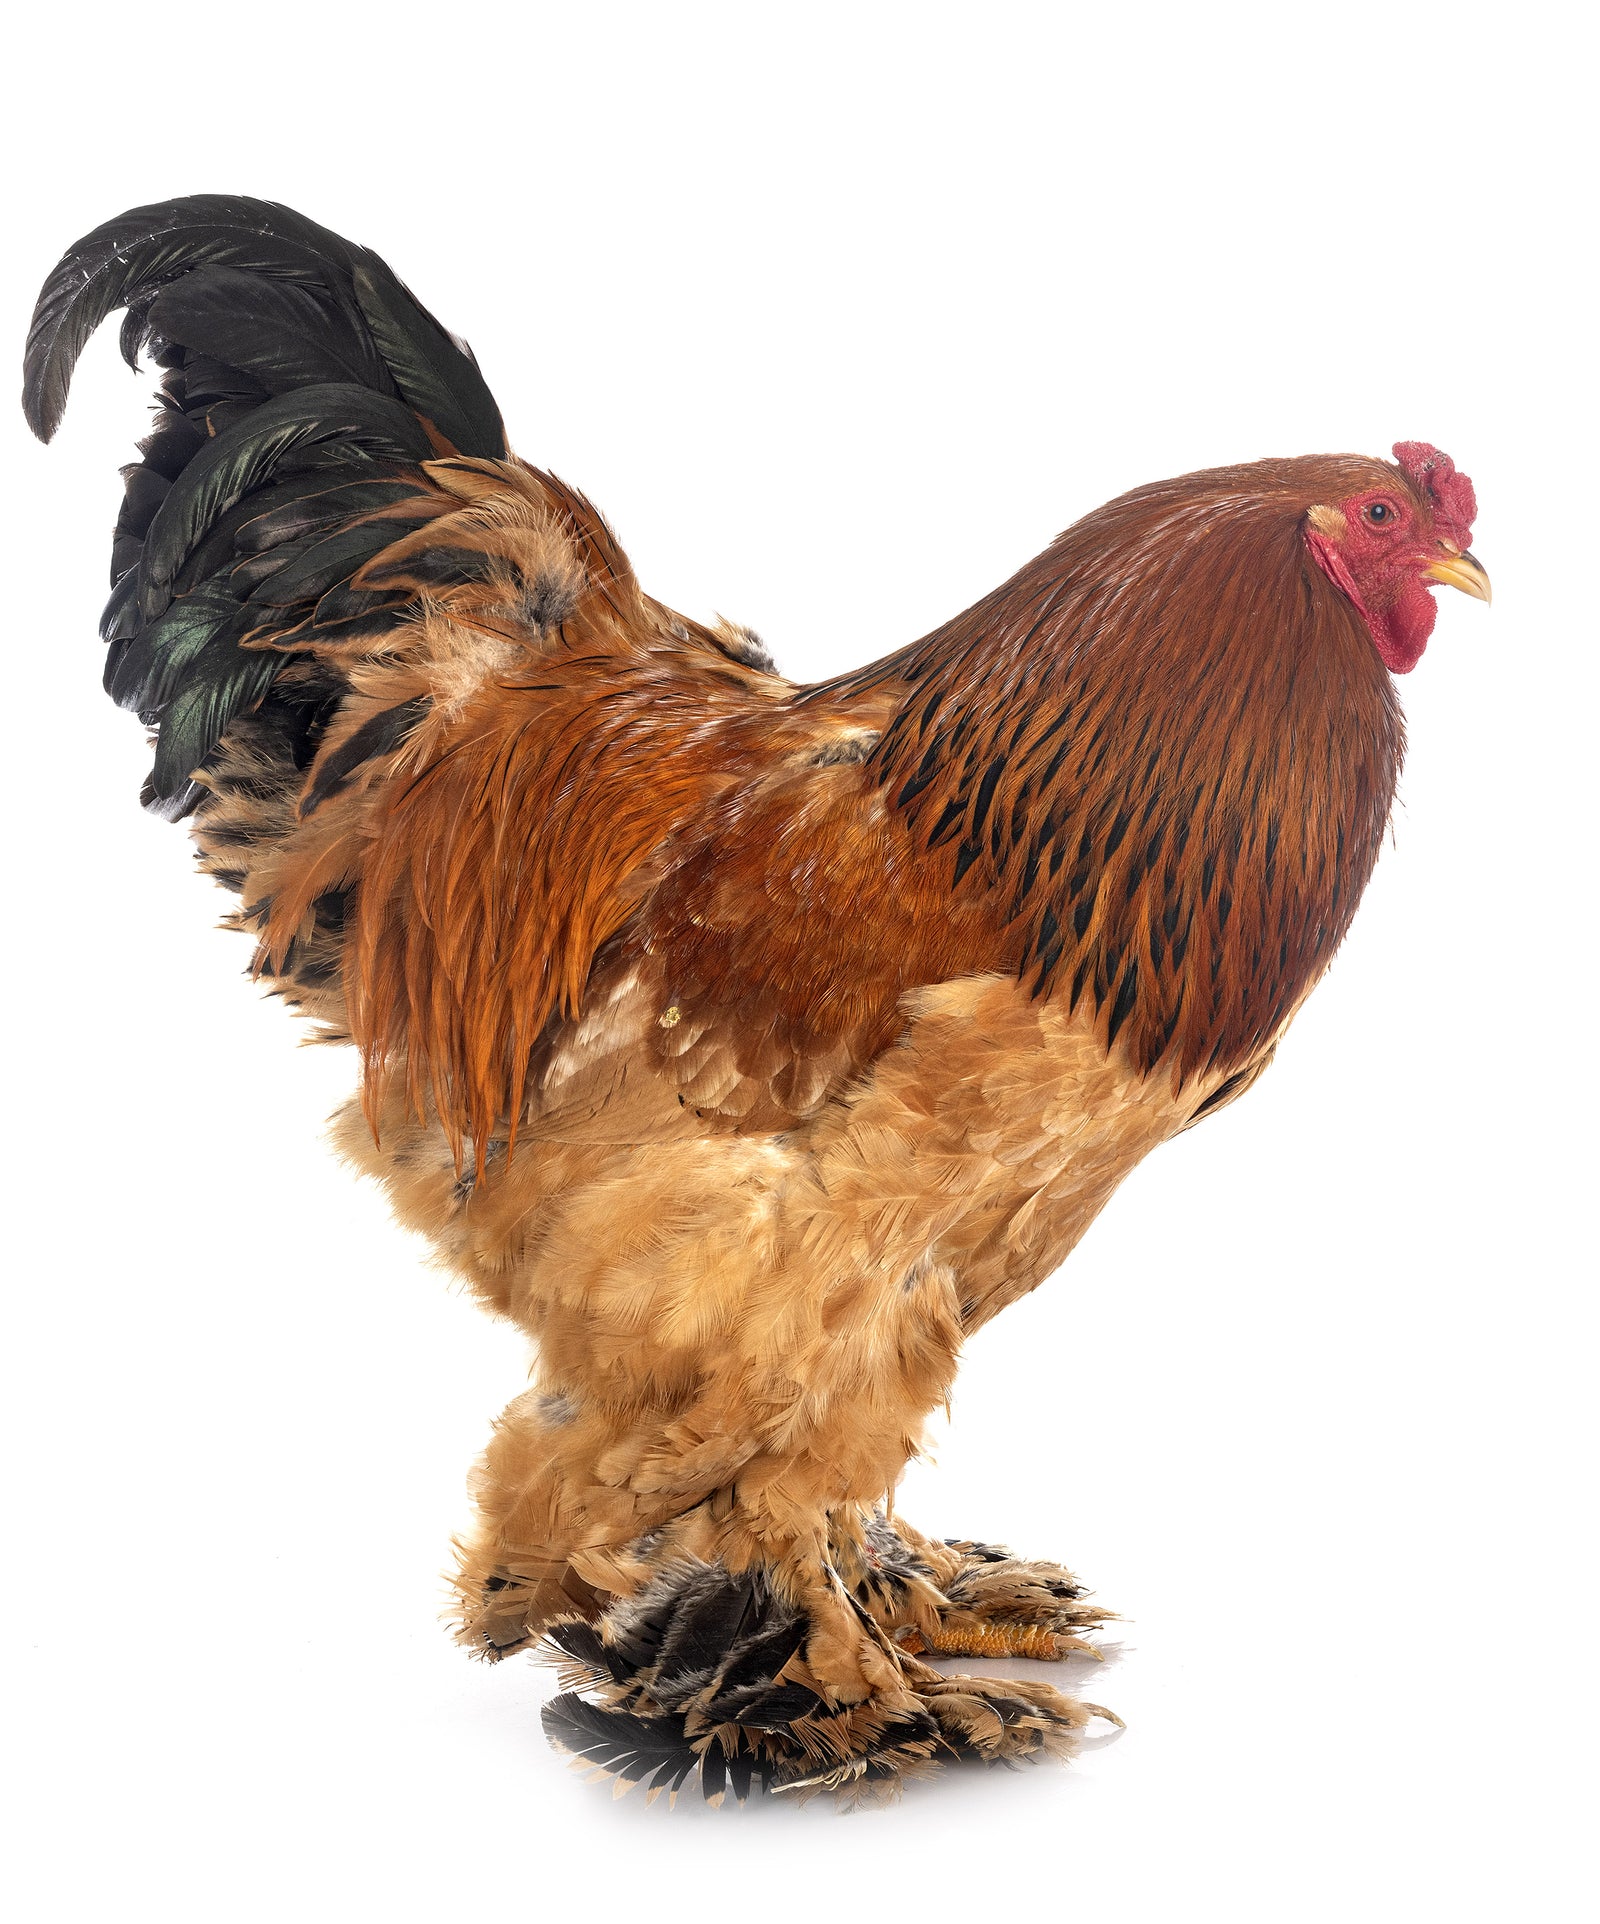 Buff Brahma Chicken with the Excessive Multi-colored Plumage that Covers  Leg and Foot. Gallus Gallus Domesticus Stock Image - Image of brown,  farming: 134842077